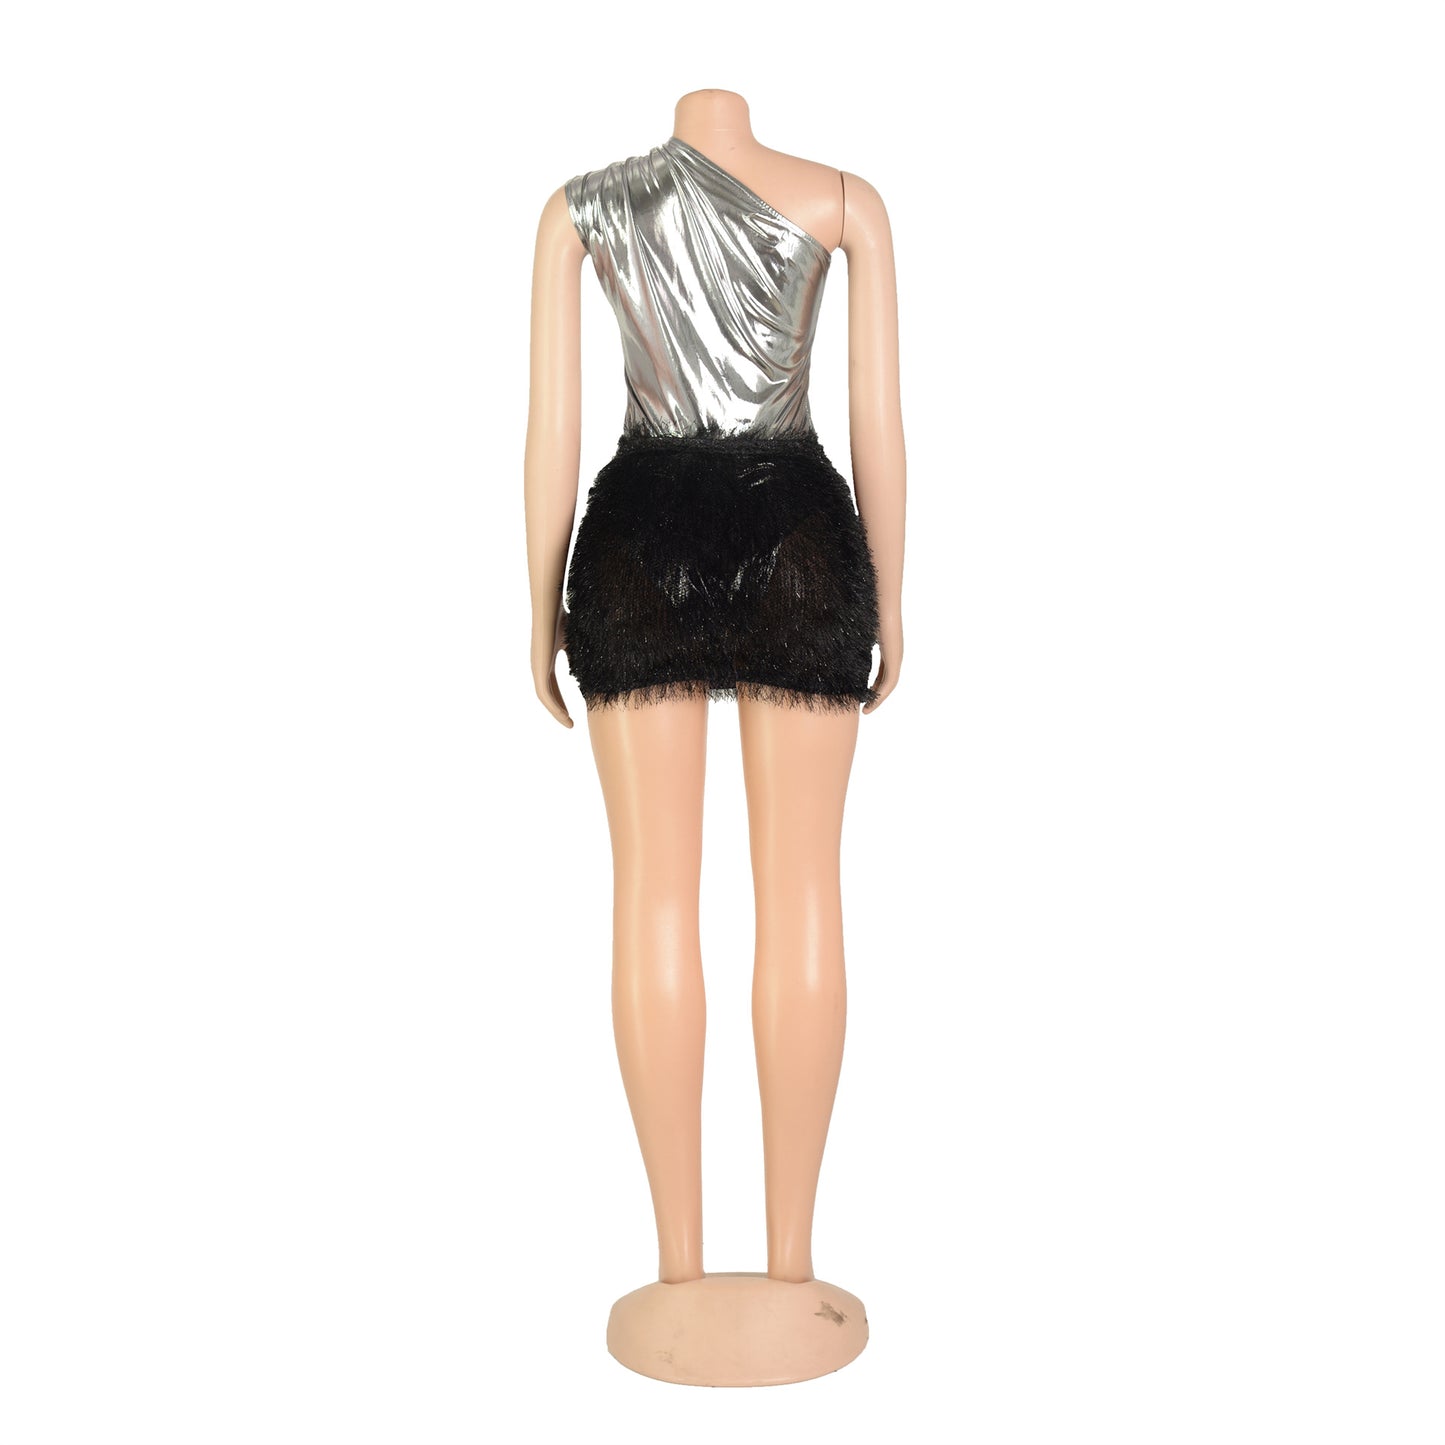 BamBam Women's Solid Color Glossy Bodysuit Sexy Short Skirt Two-Piece Set - BamBam